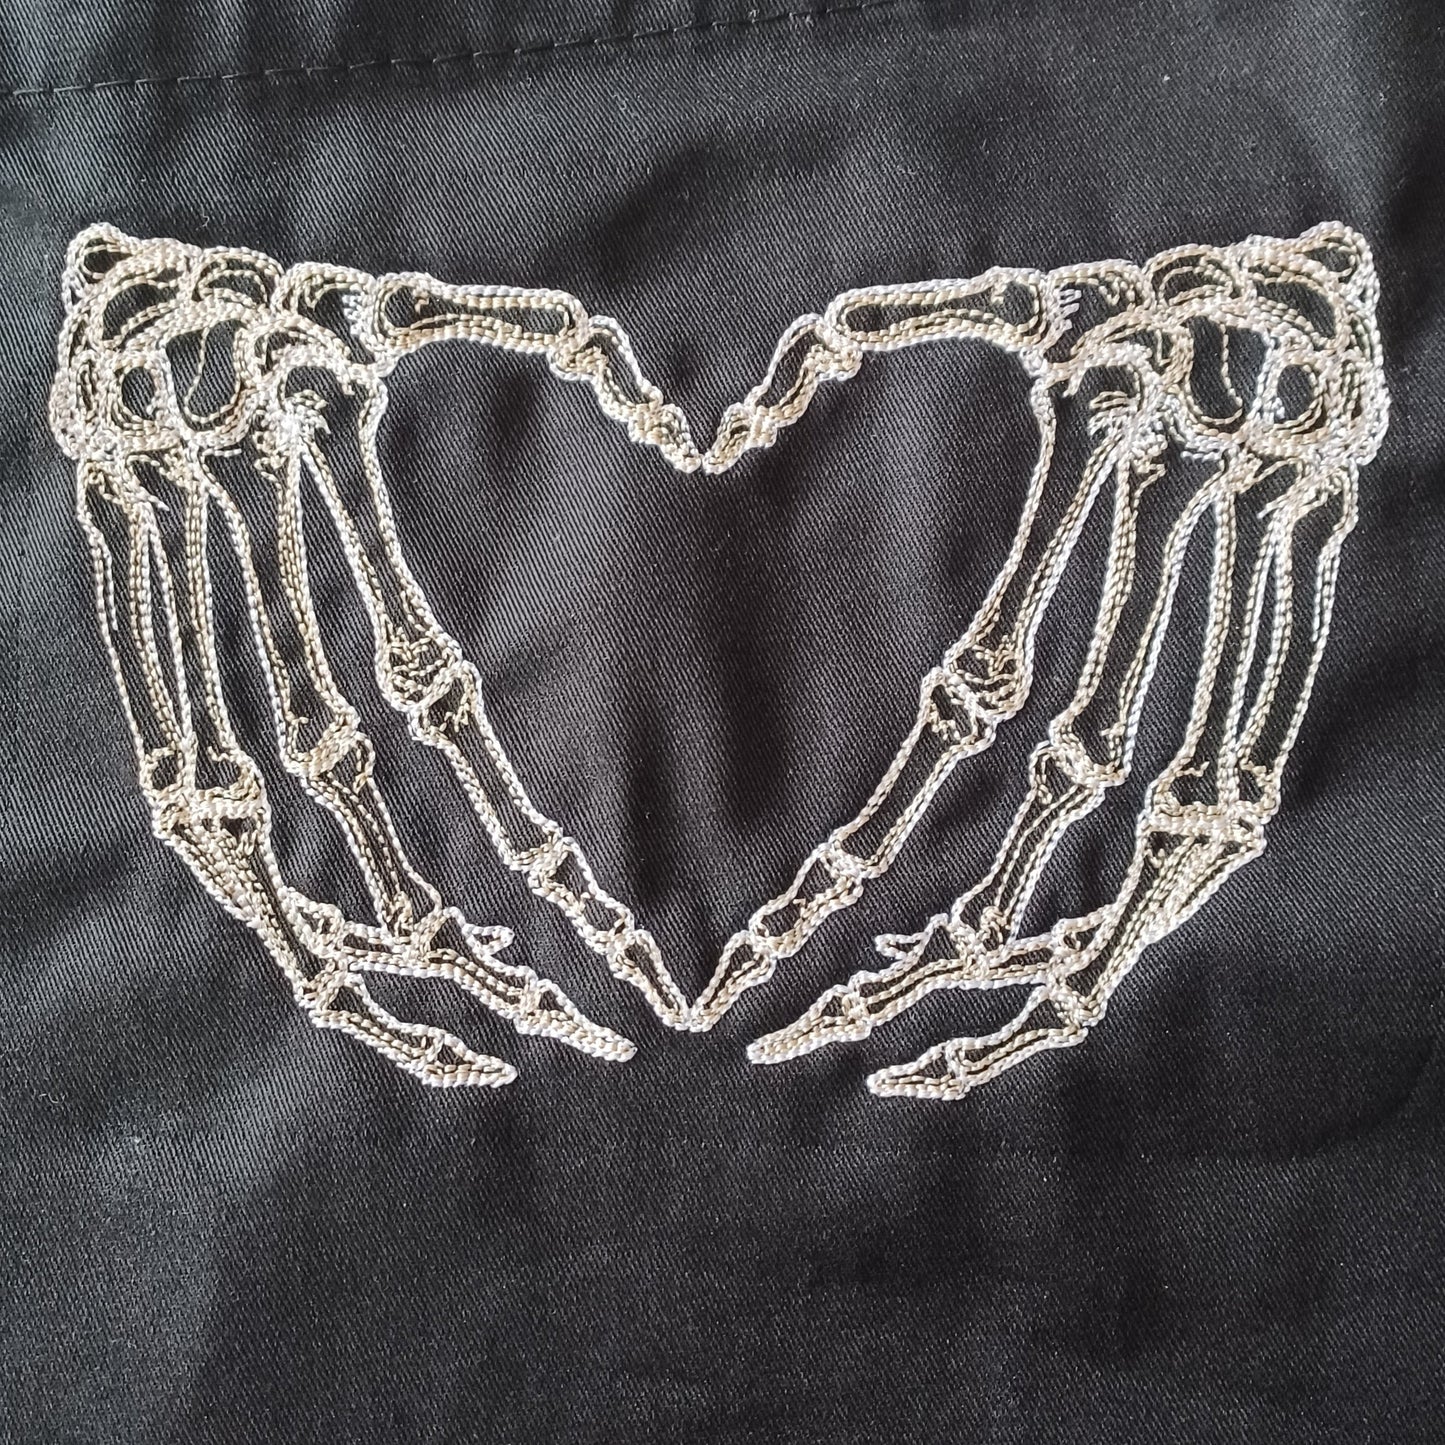 Skeleton Heart Hands (Embroidered CYO)